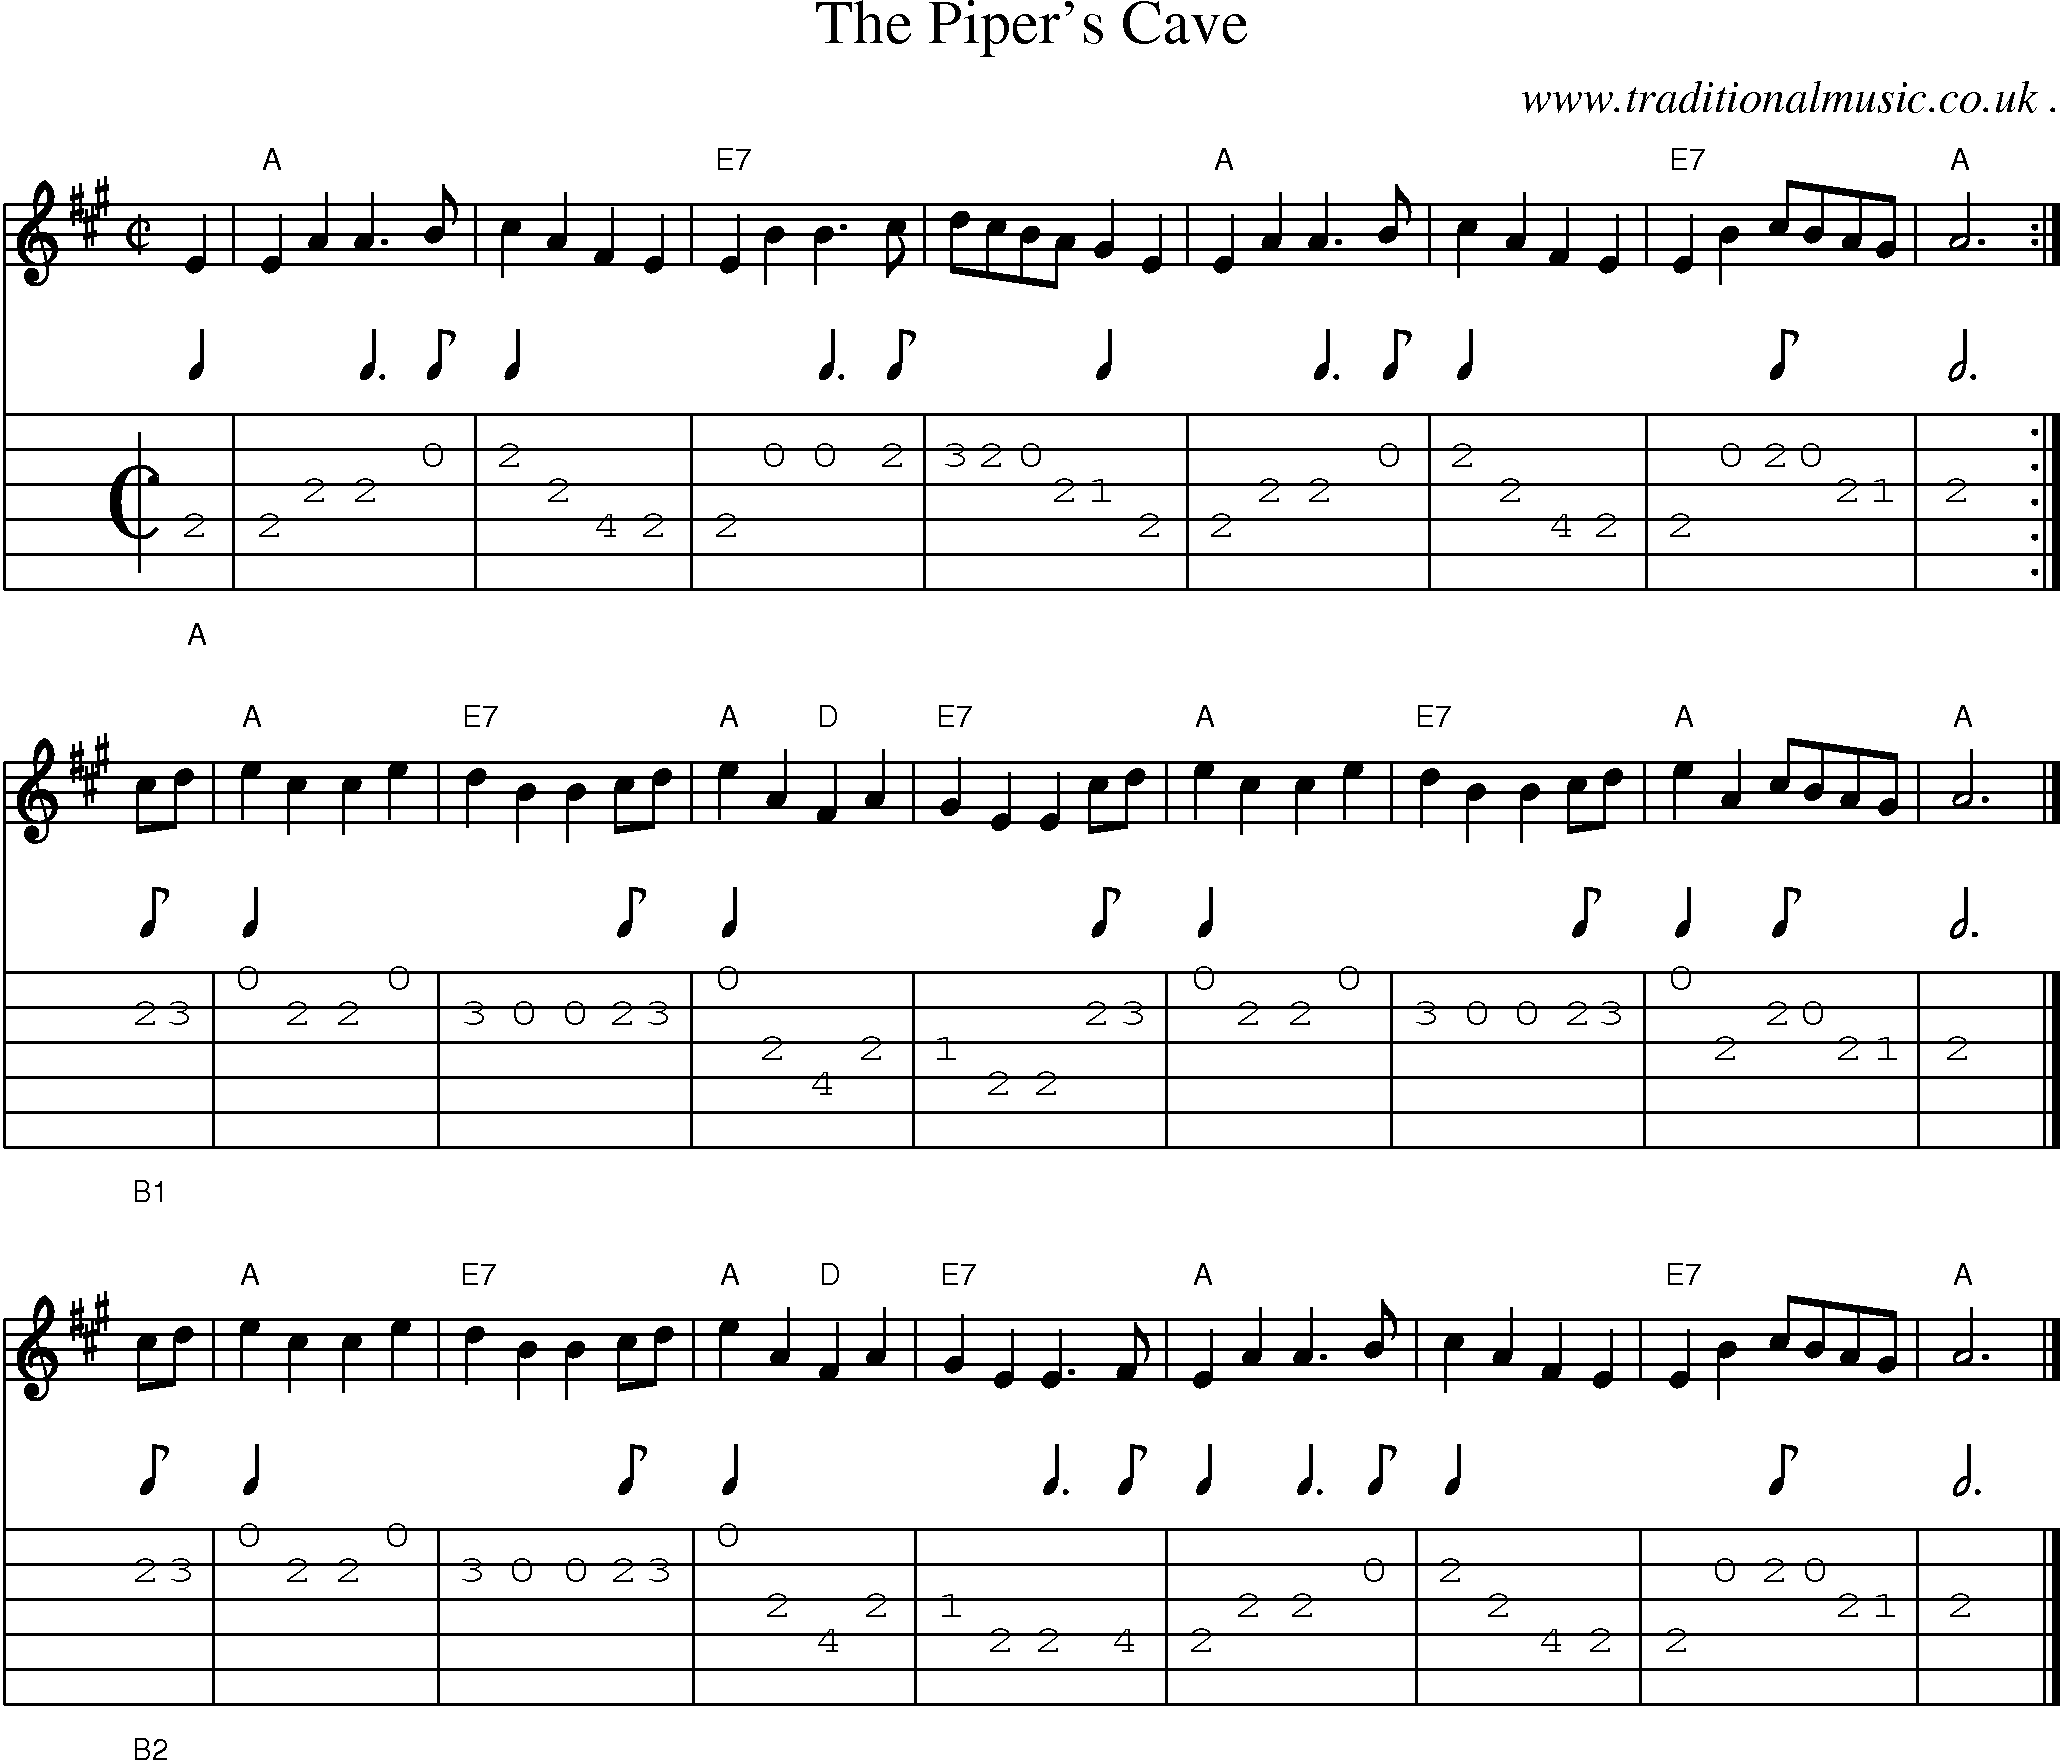 Sheet-music  score, Chords and Guitar Tabs for The Pipers Cave